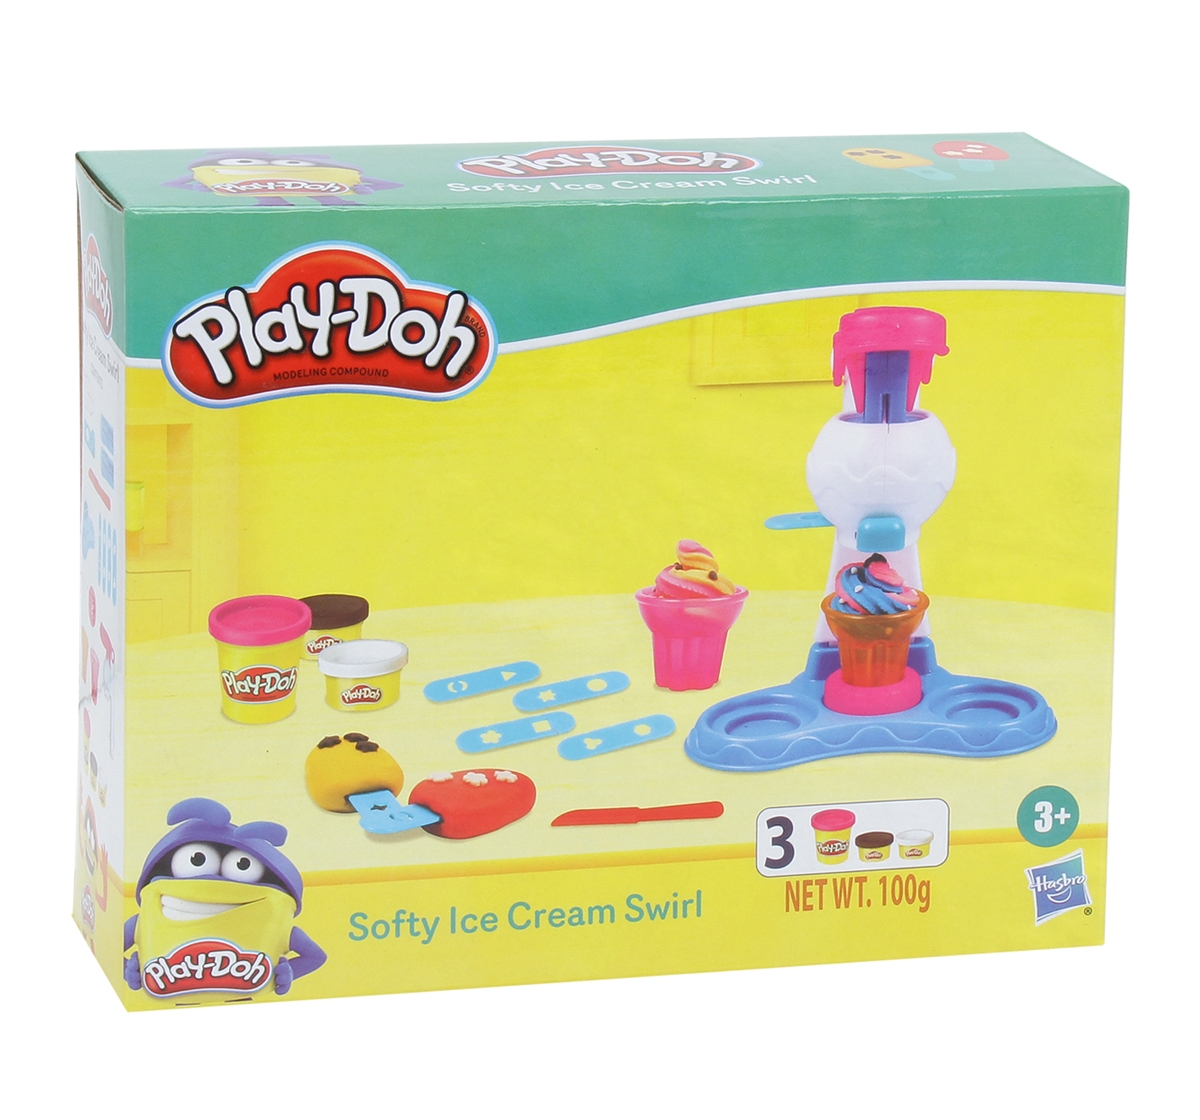 Play-Doh | Play Doh Softy Ice Cream Swirl Playset for Kids 3Y+, Multicolour 4